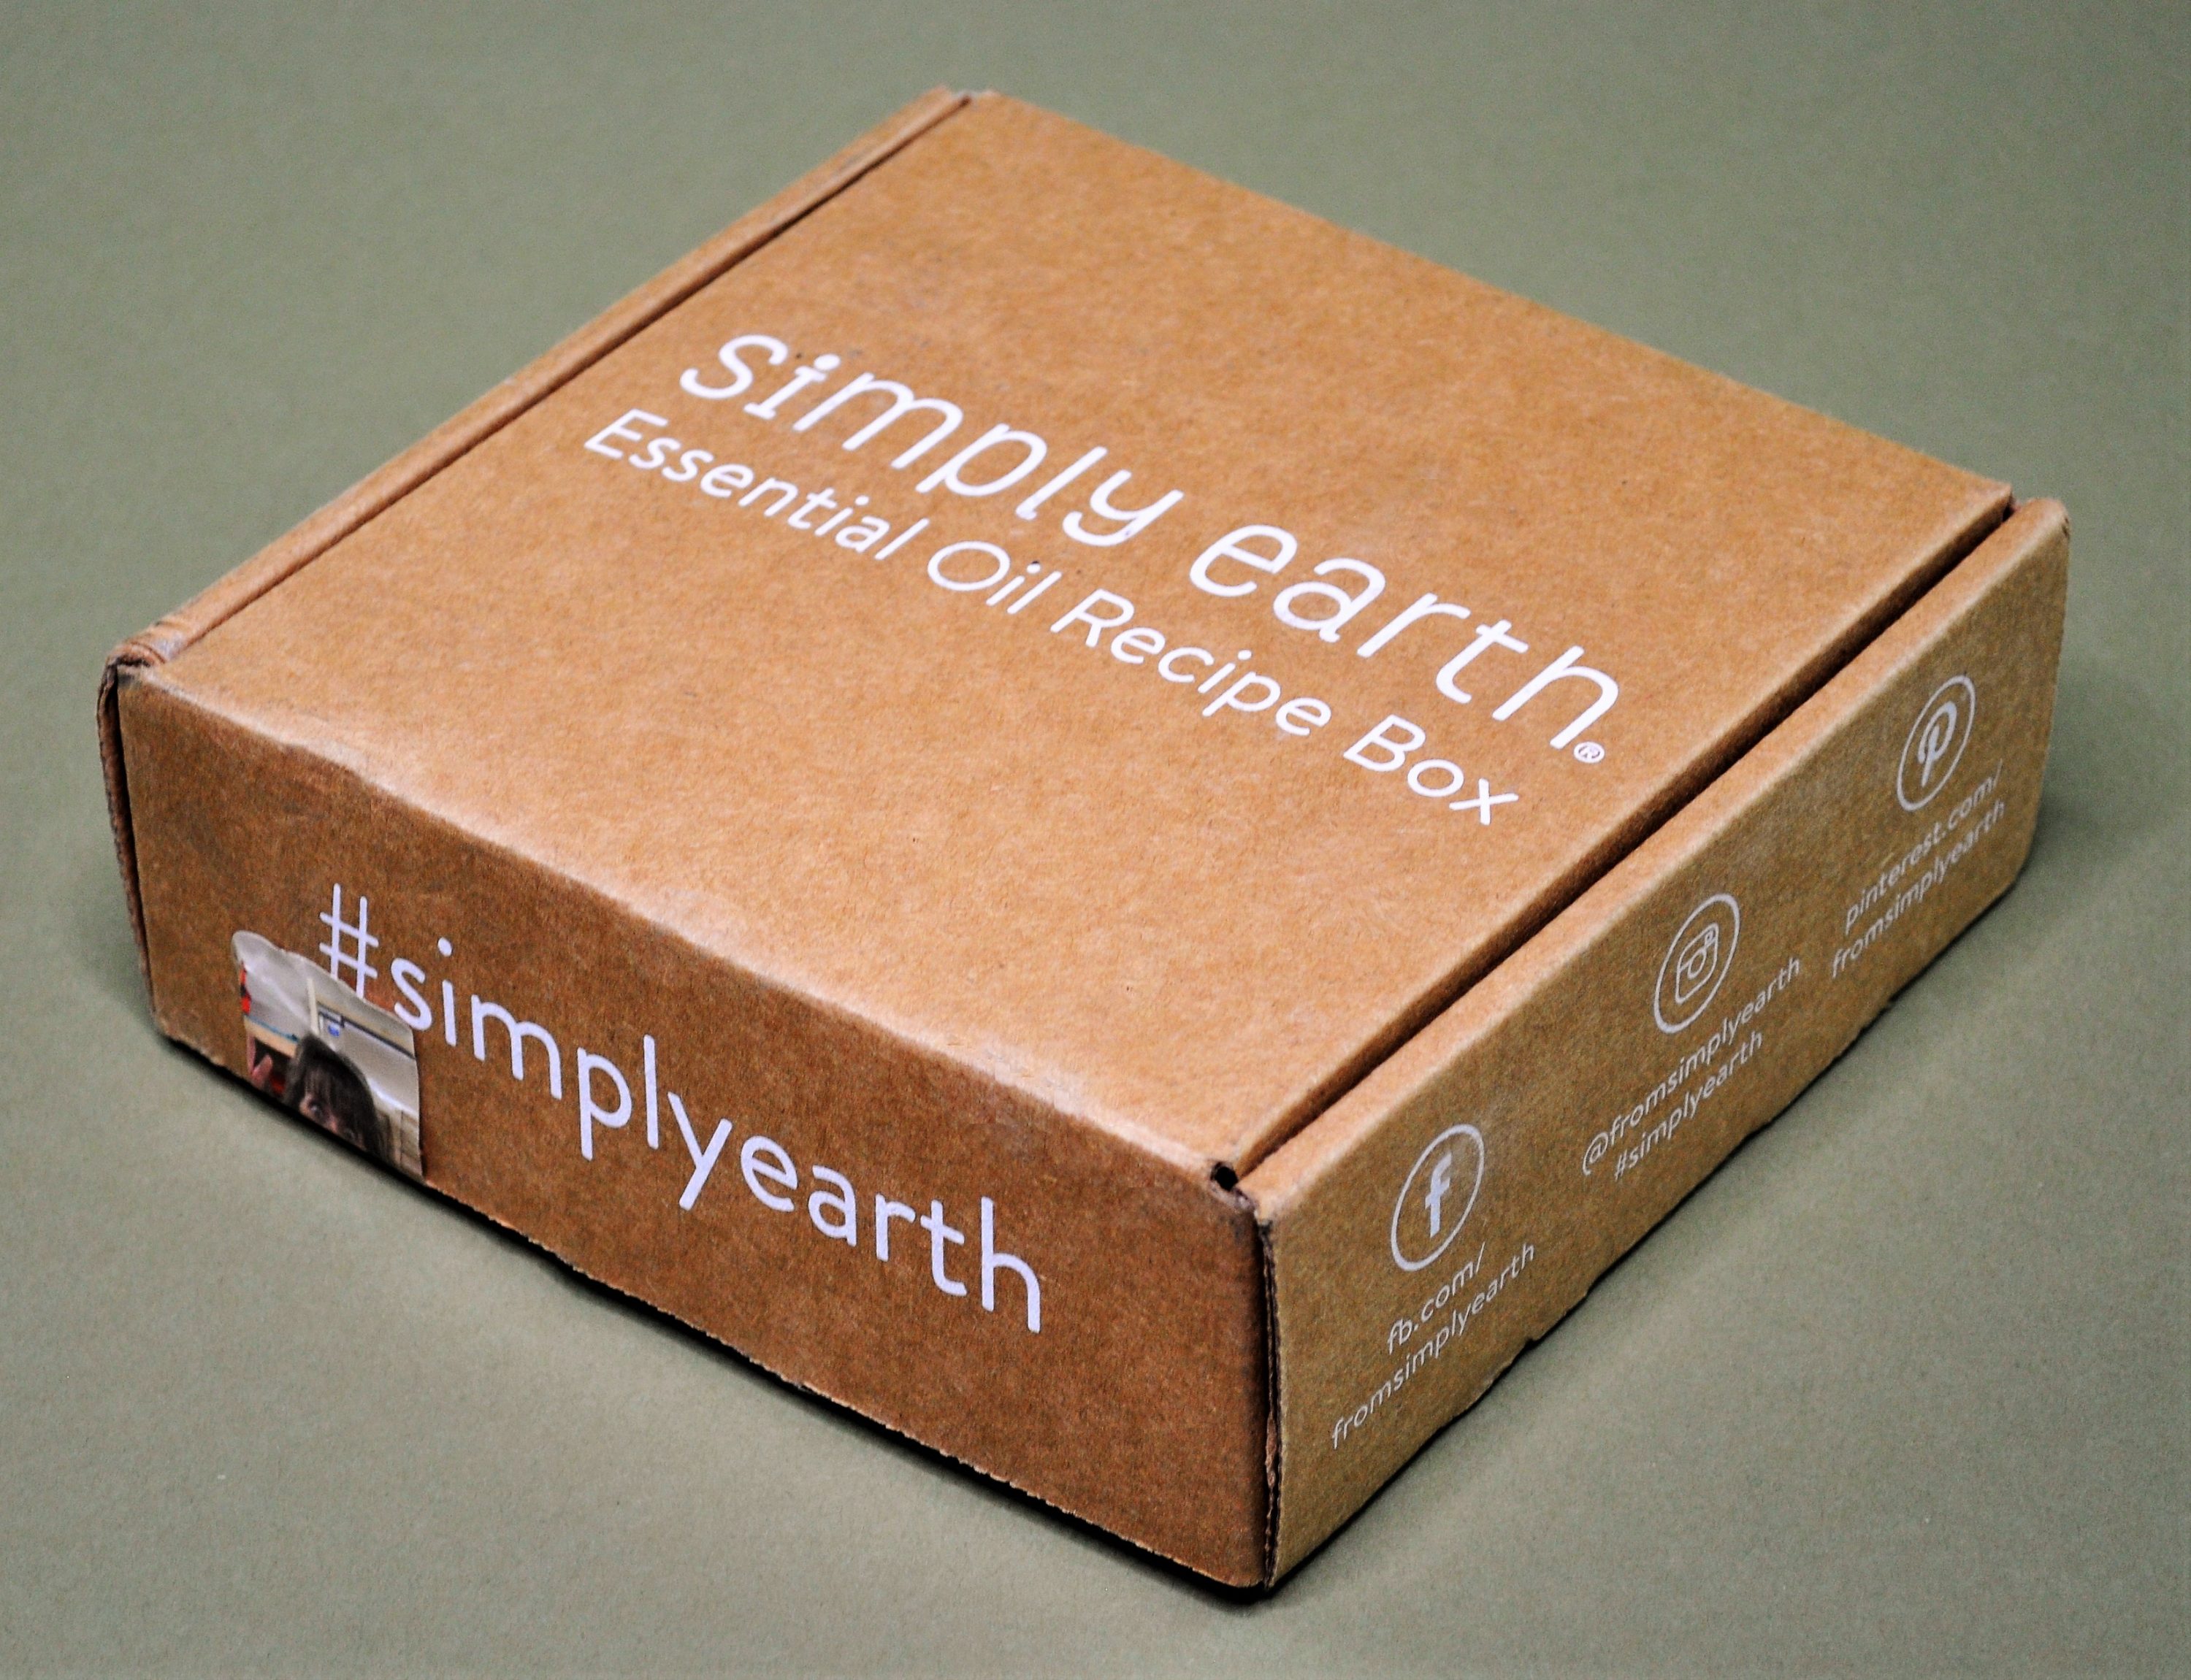 Simply Earth Box Review December 2019